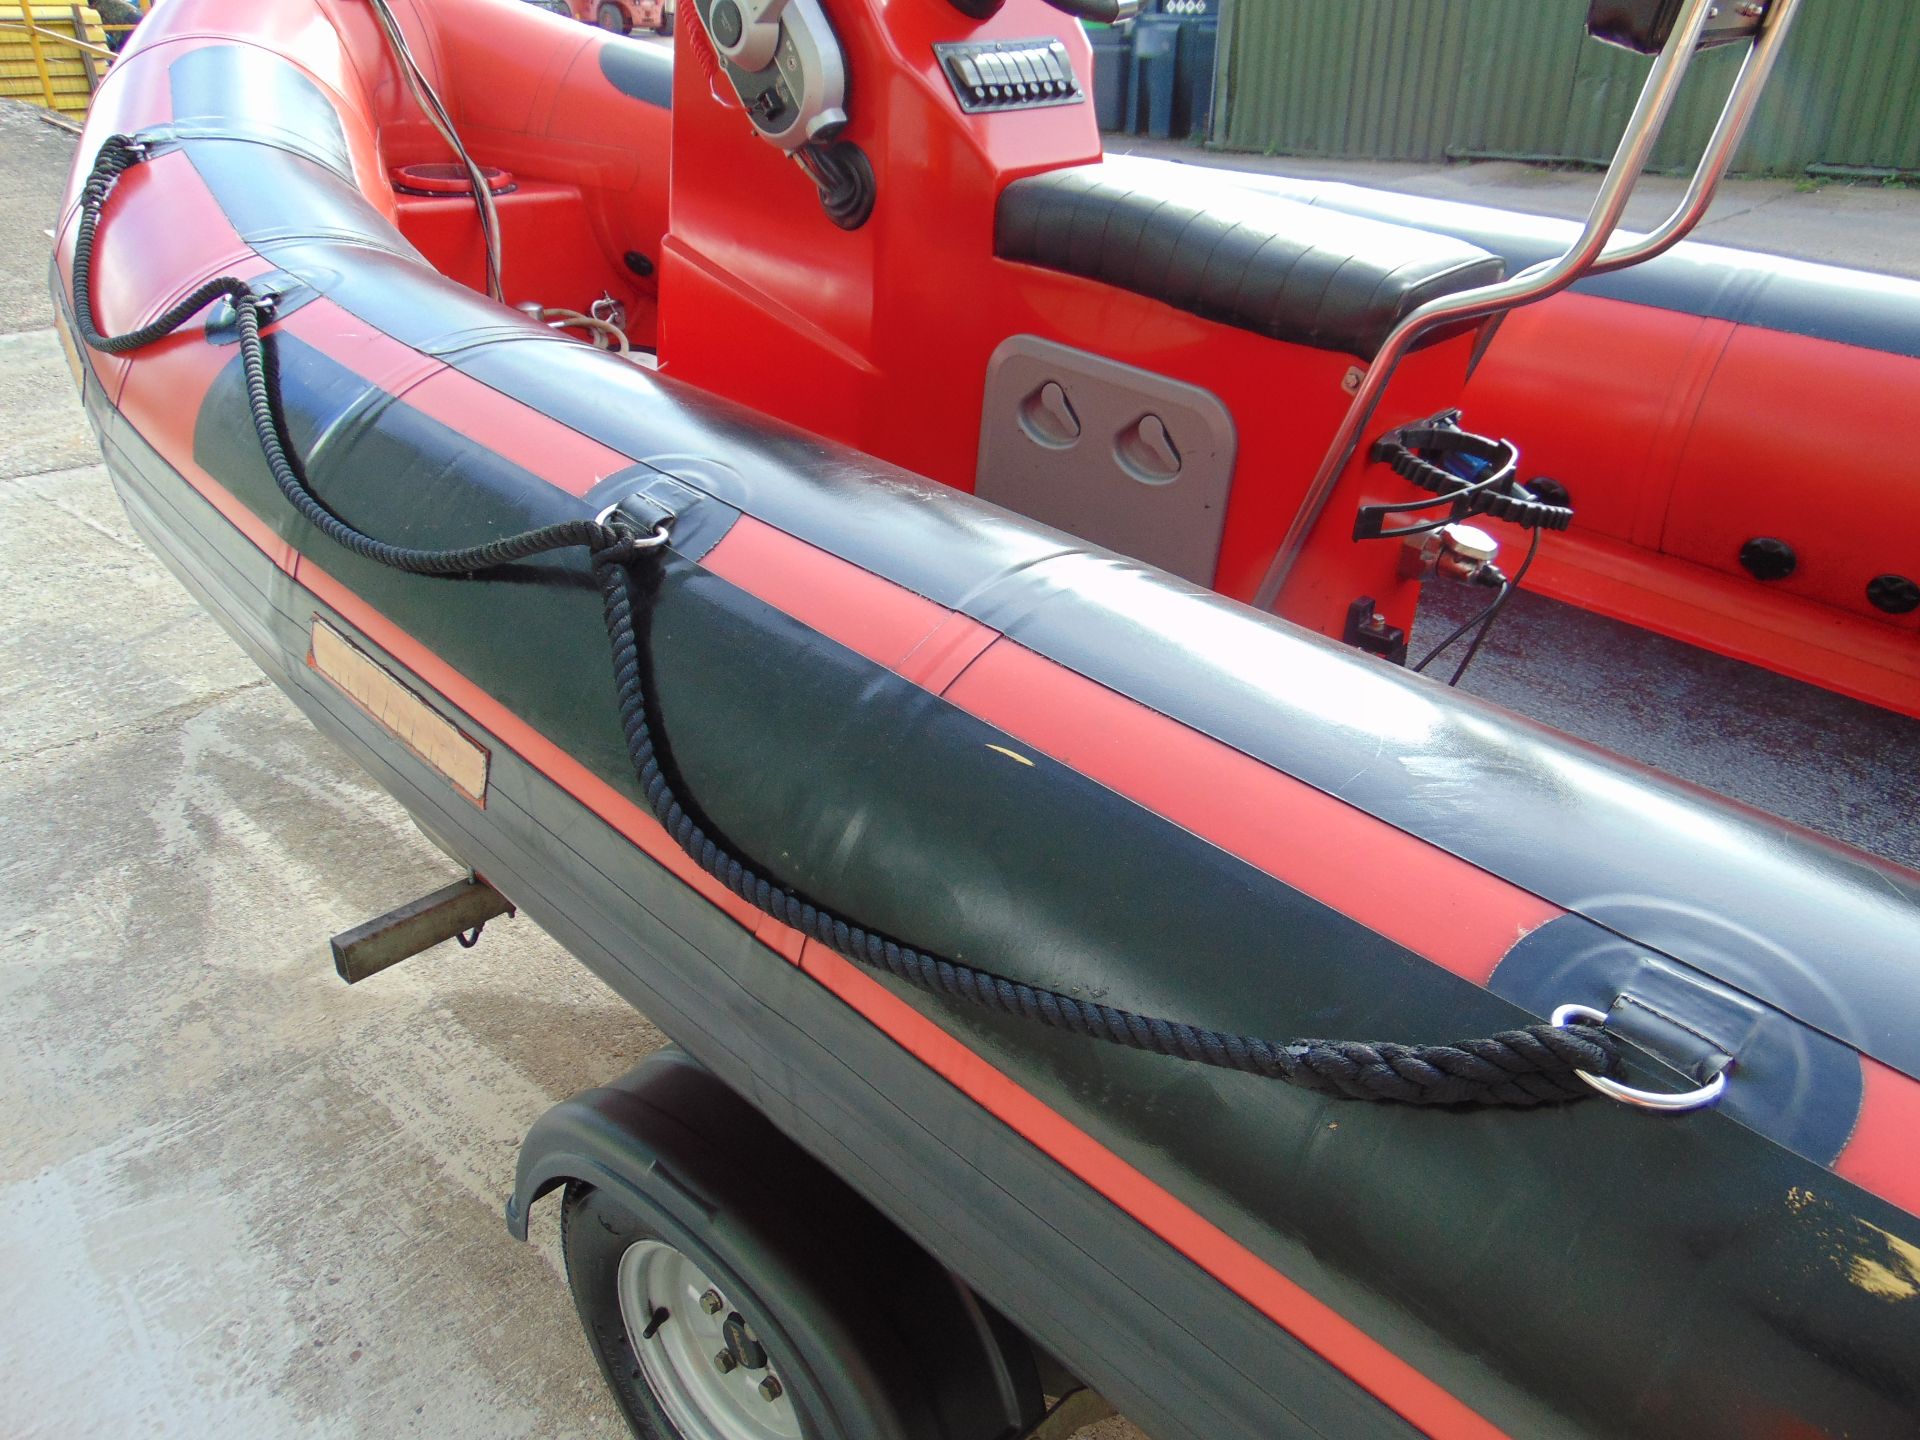 XS-Ribs 4.6M Inflatable w/ Mercury Mariner Four Stroke EFI 60HP Outboard Motor on Trailer. - Image 11 of 57